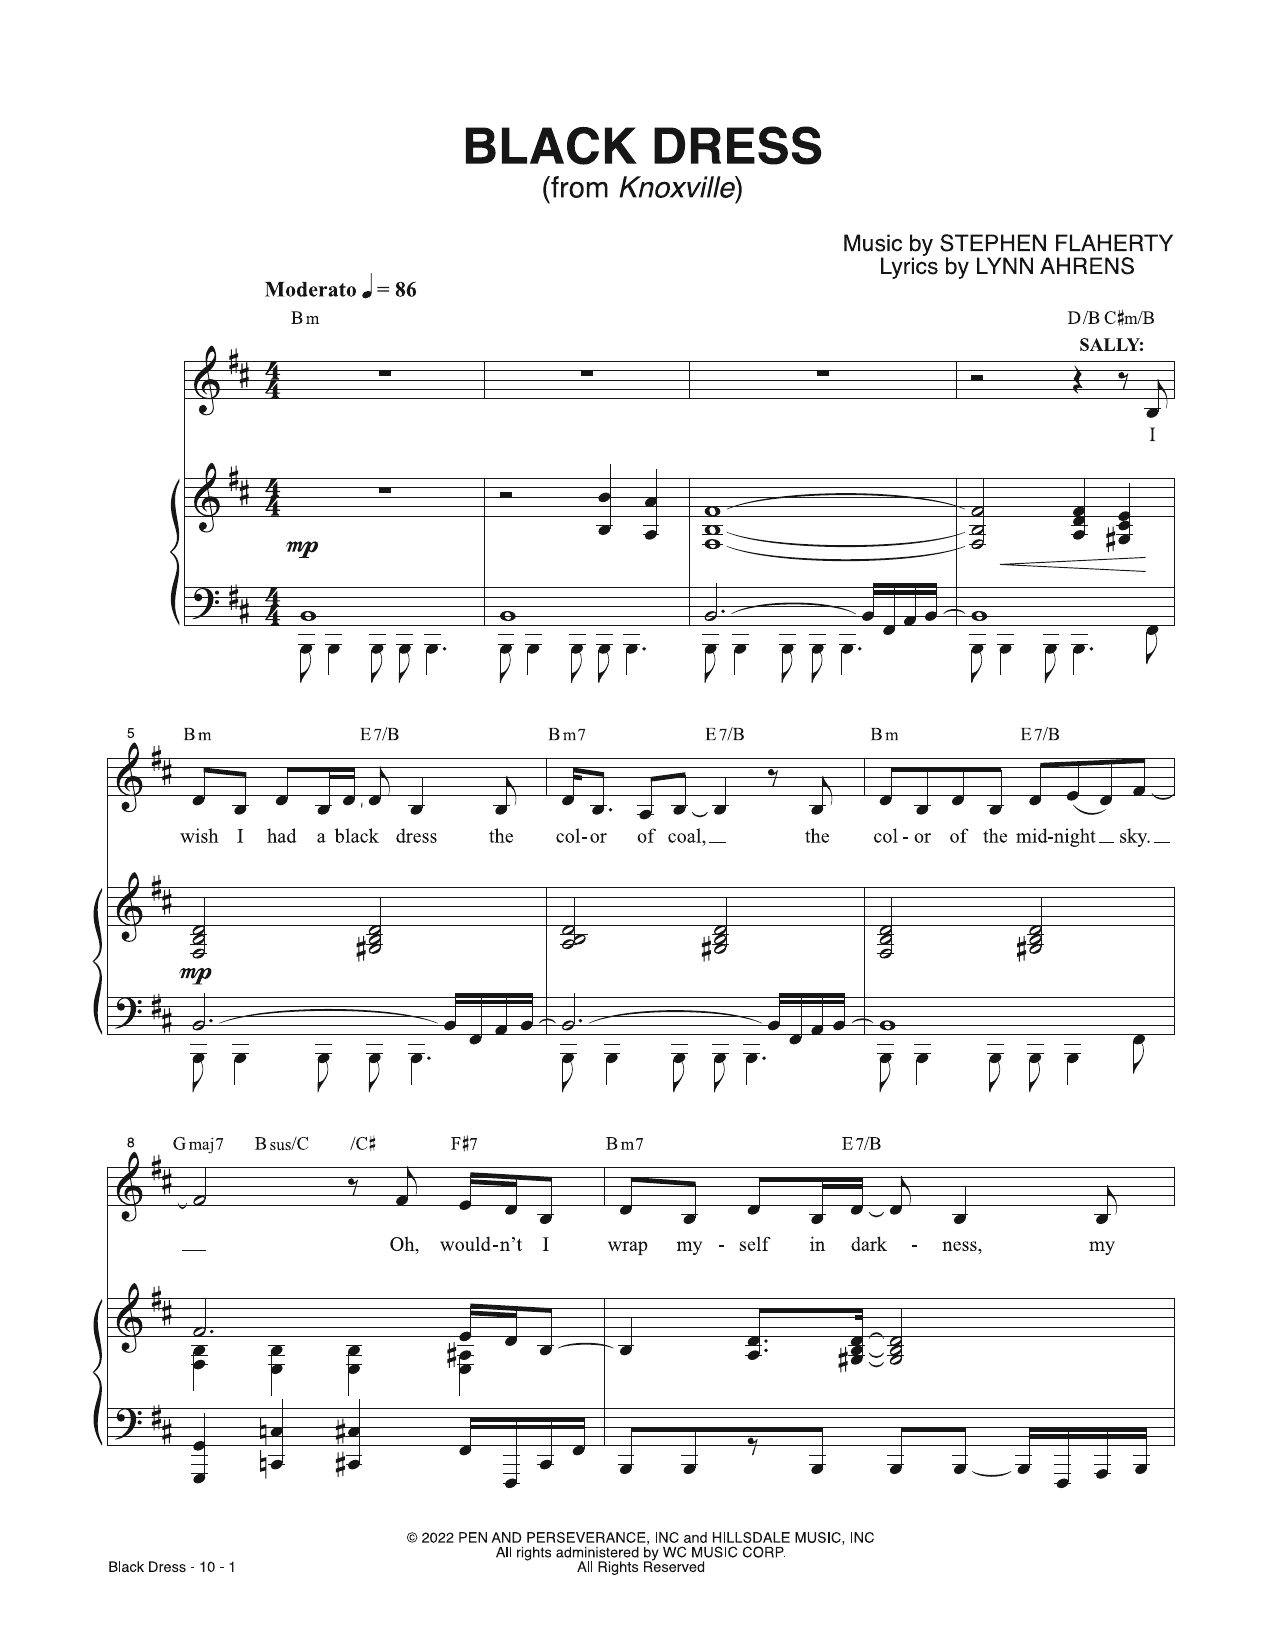 Lynn Ahrens & Stephen Flaherty Black Dress (from Knoxville) sheet music notes printable PDF score